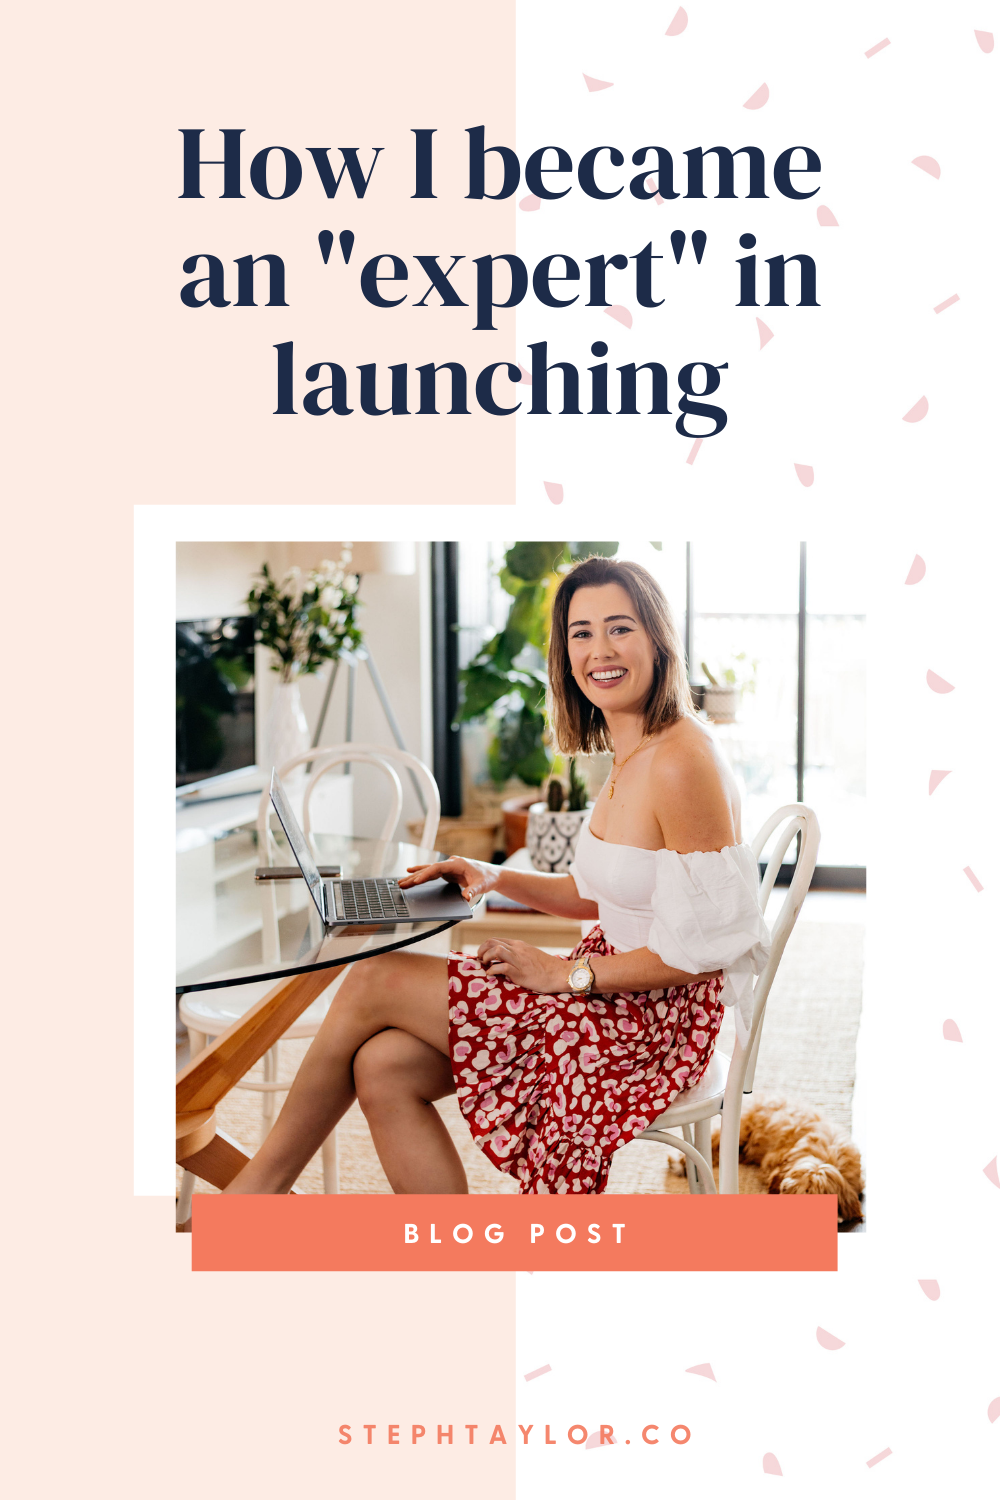 How I became an expert in launching